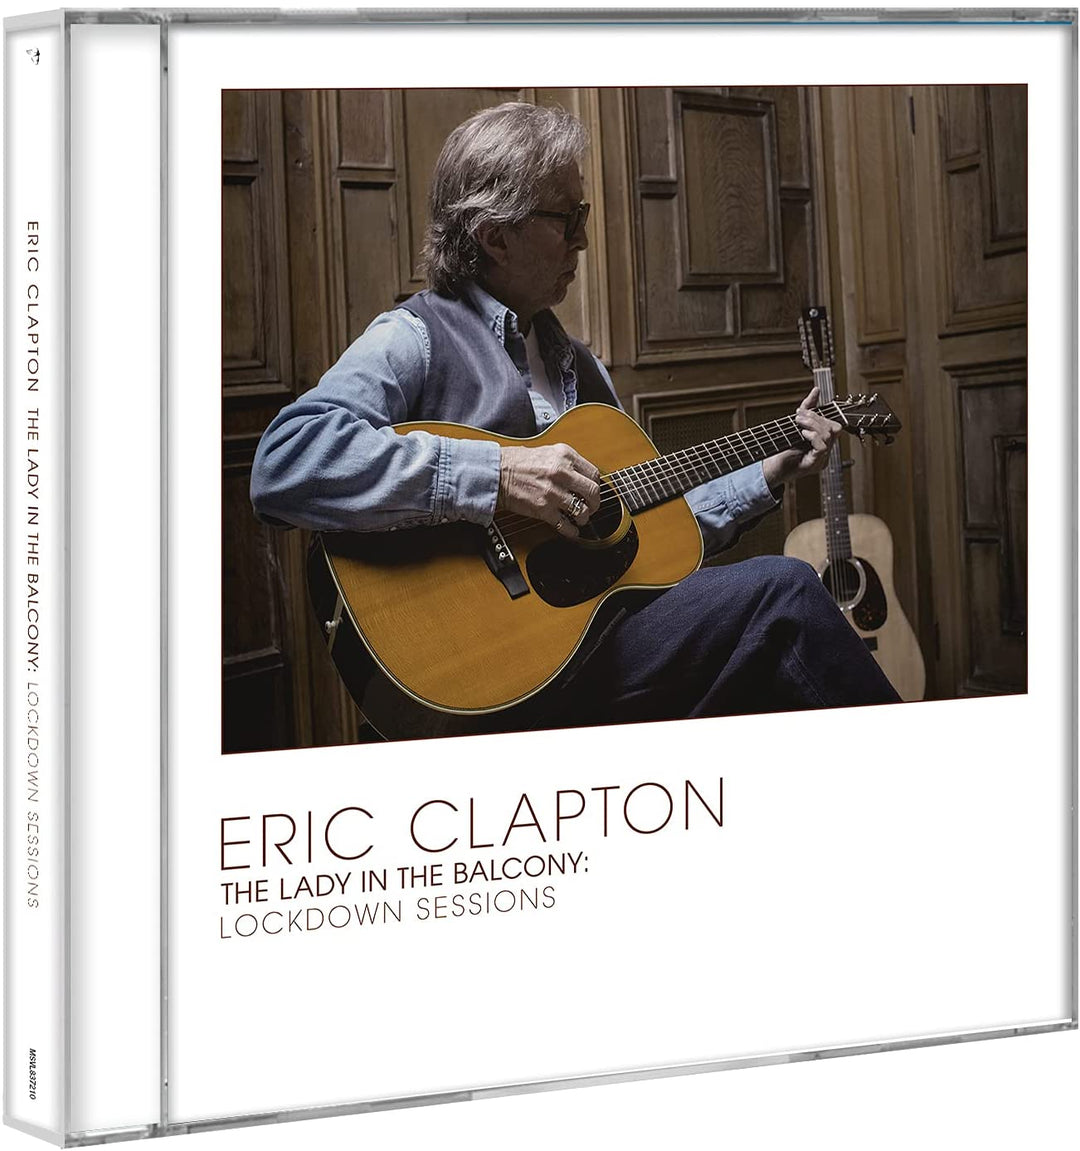 Eric Clapton - The Lady In The Balcony: Lockdown Sessions [CD]